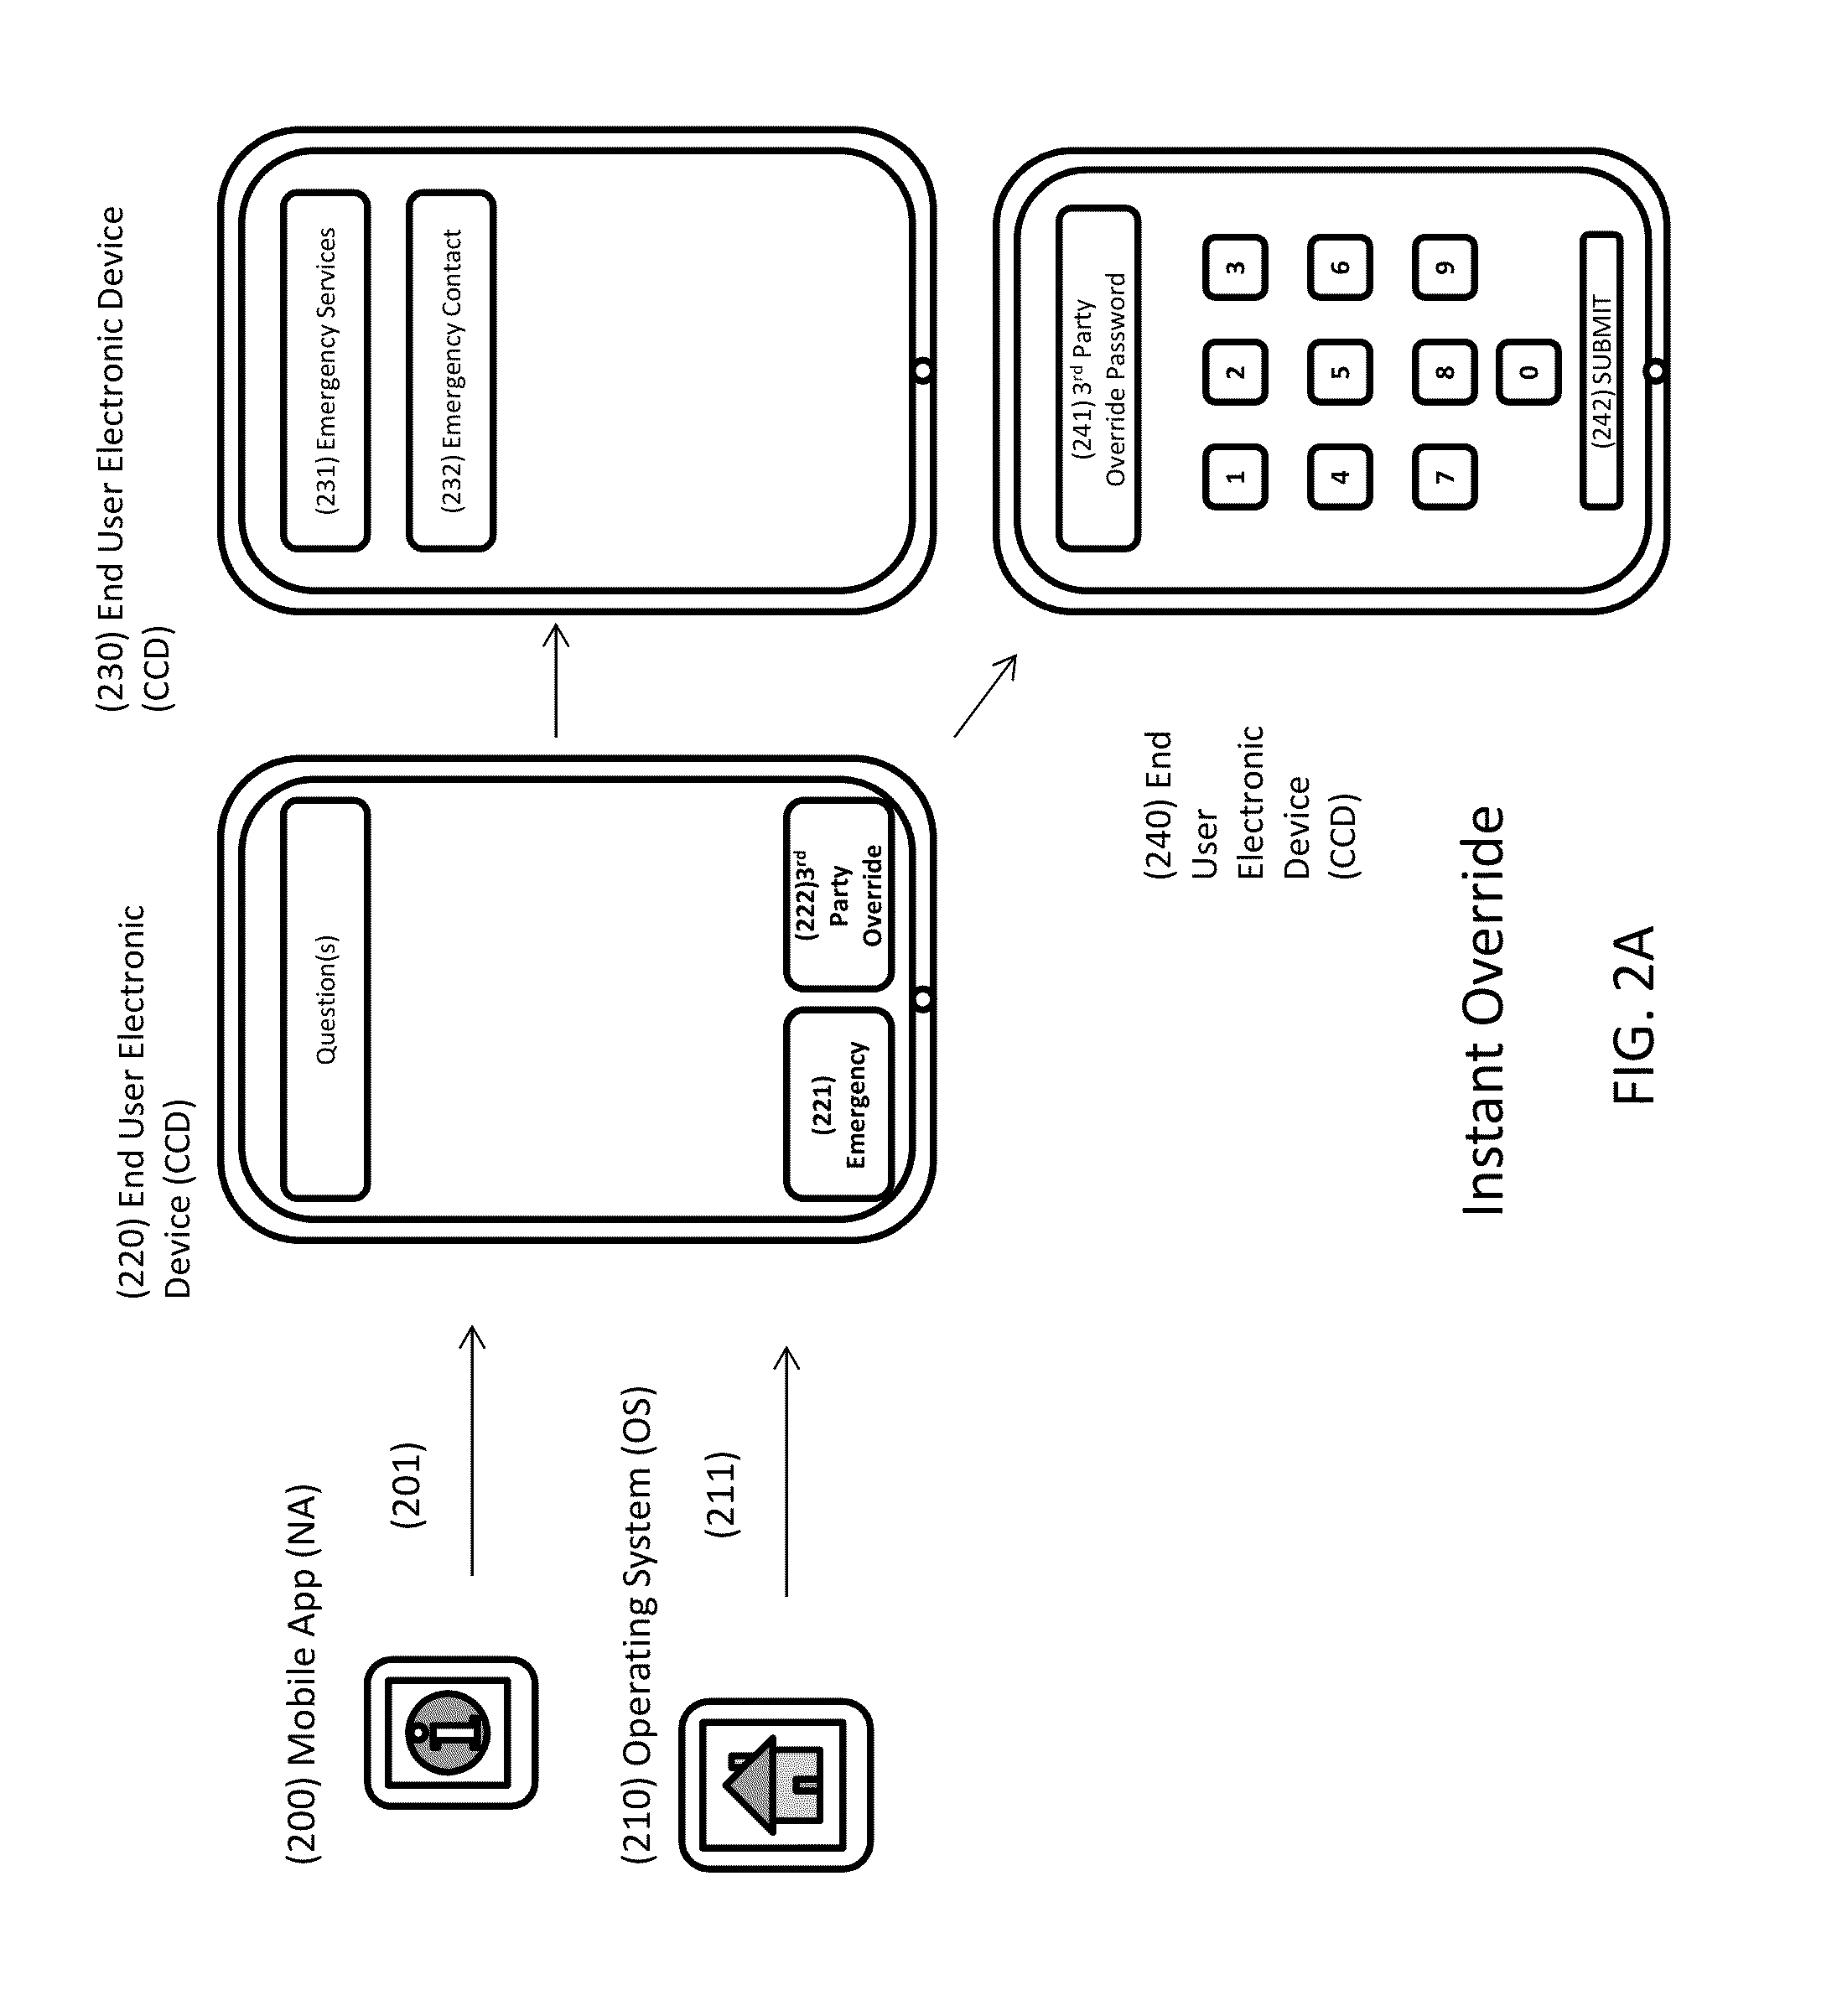 Method and System for Integration of Instruction and Task Completion Based Access to Mobile Device Operating Systems